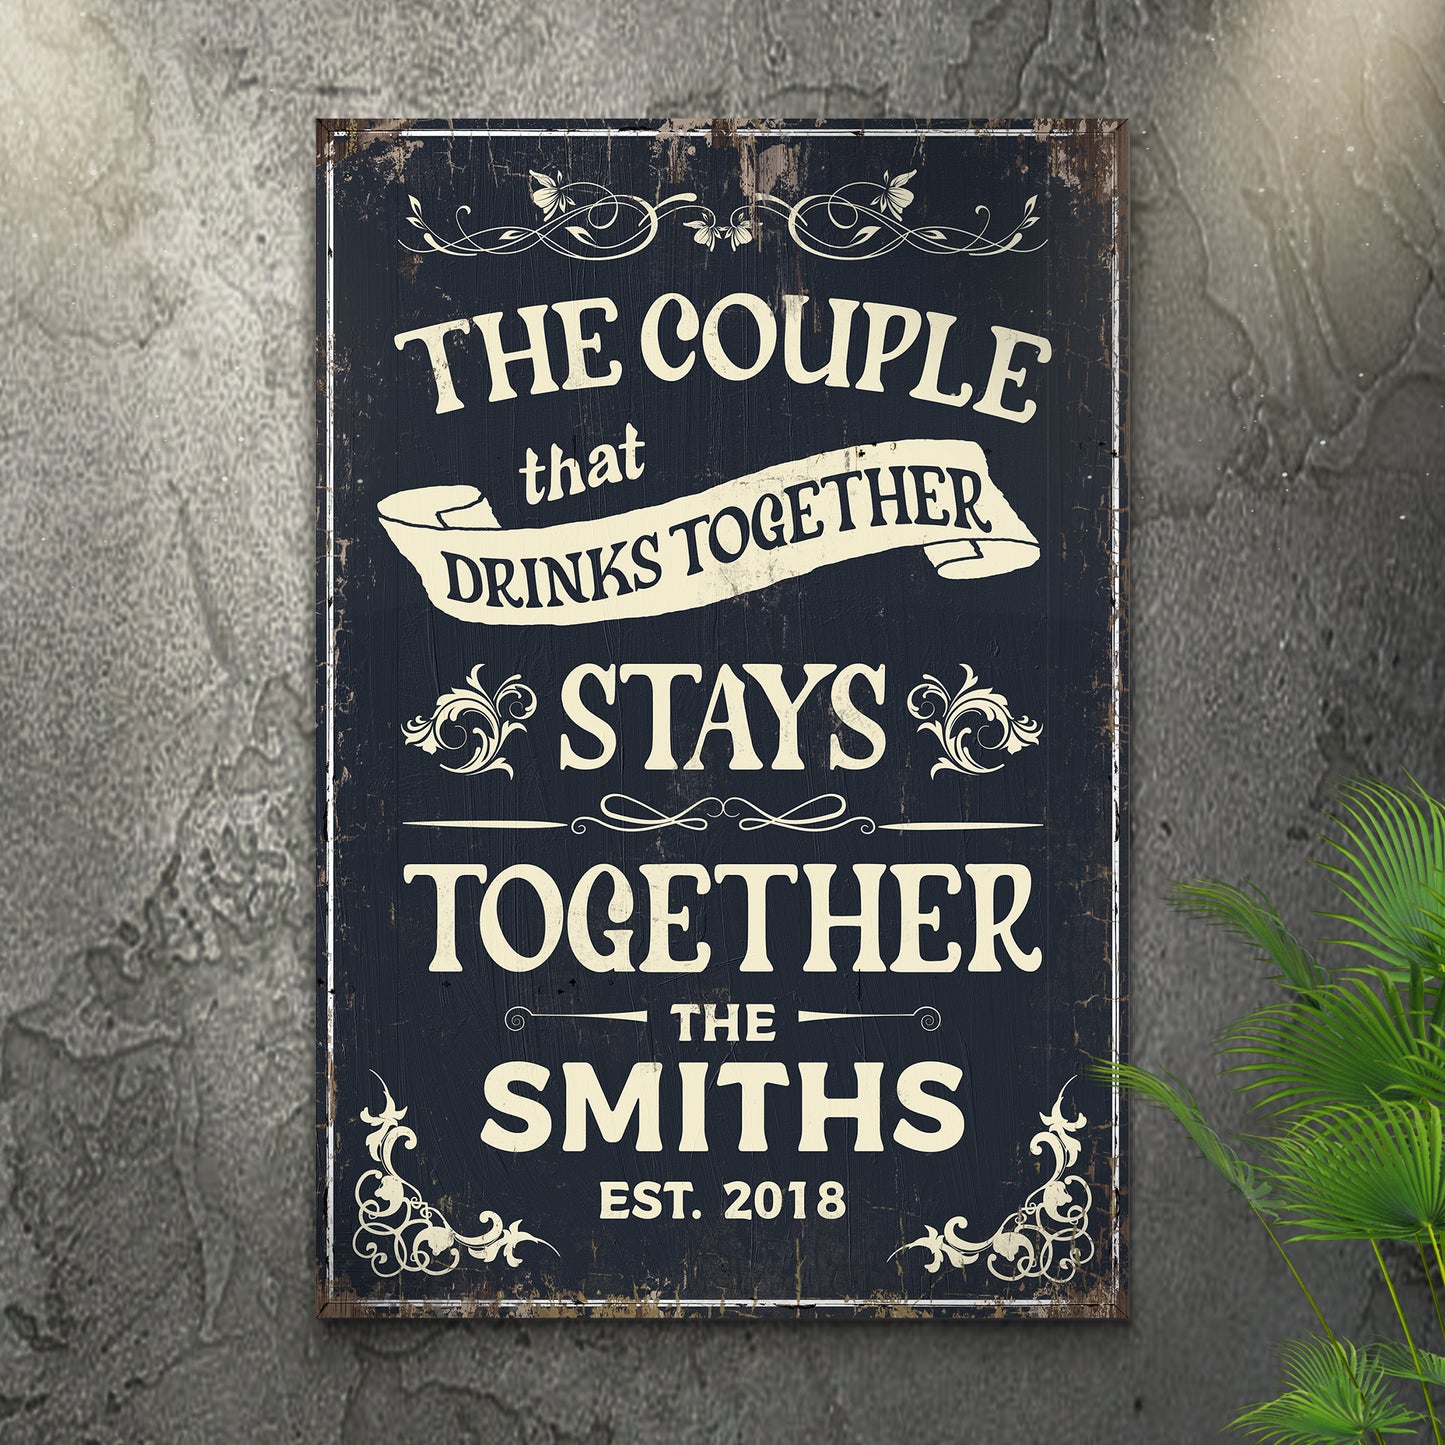 The Couple that drinks together stays together Custom Sign (READY TO HANG) - Wall Art Image by Tailored Canvases